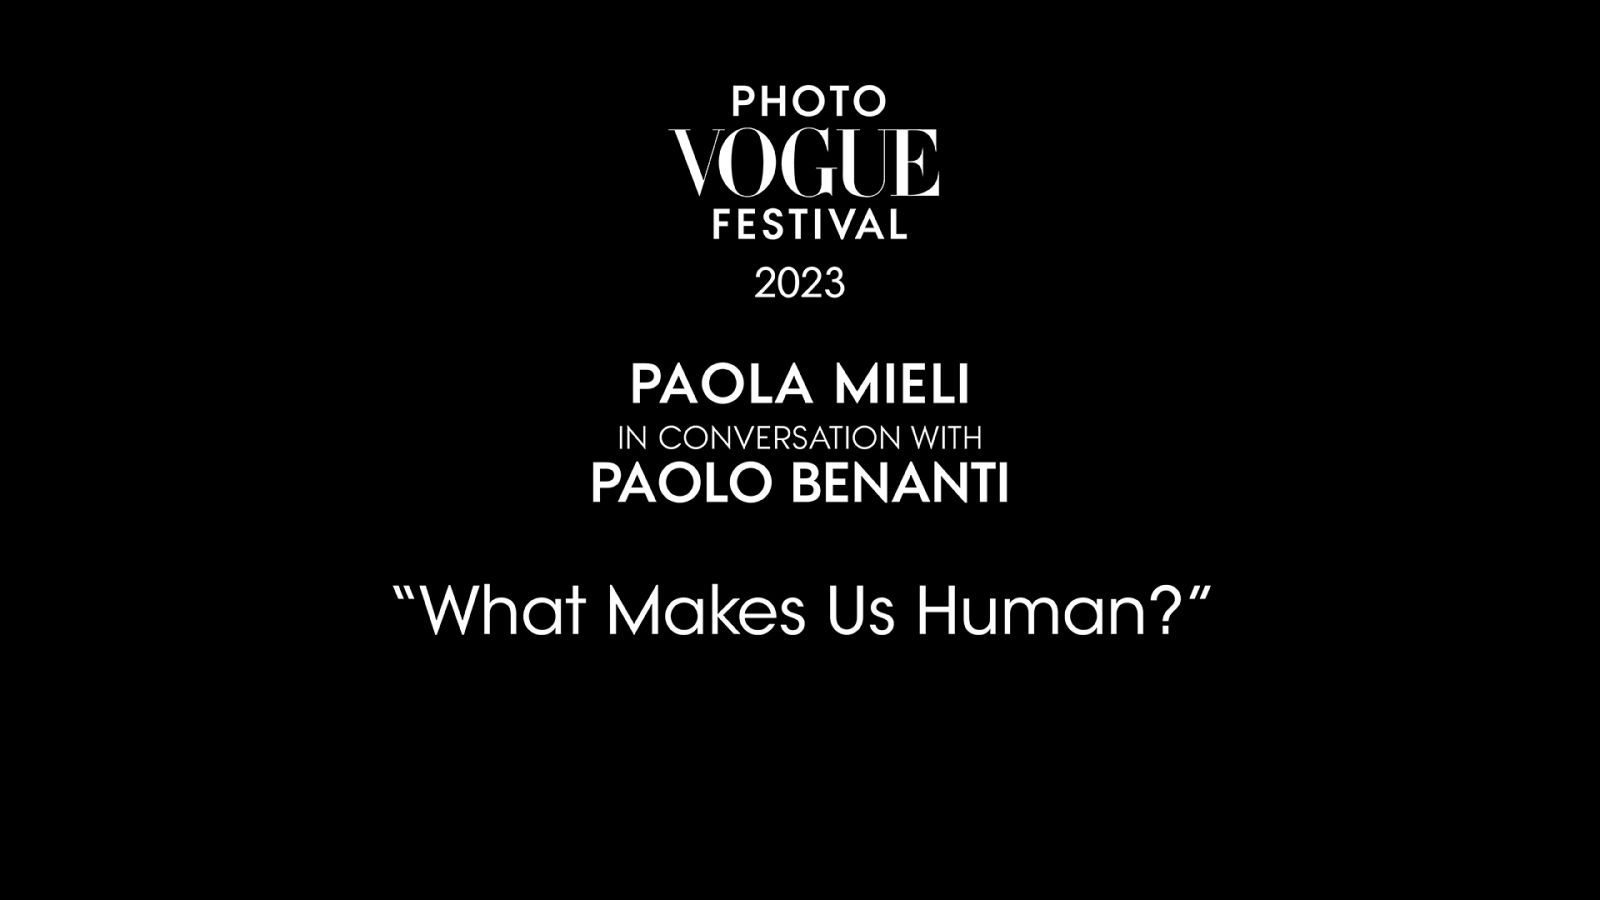 What Makes Us Human? | PhotoVogue Festival 2023: What Makes Us Human? Image in the Age of A.I.